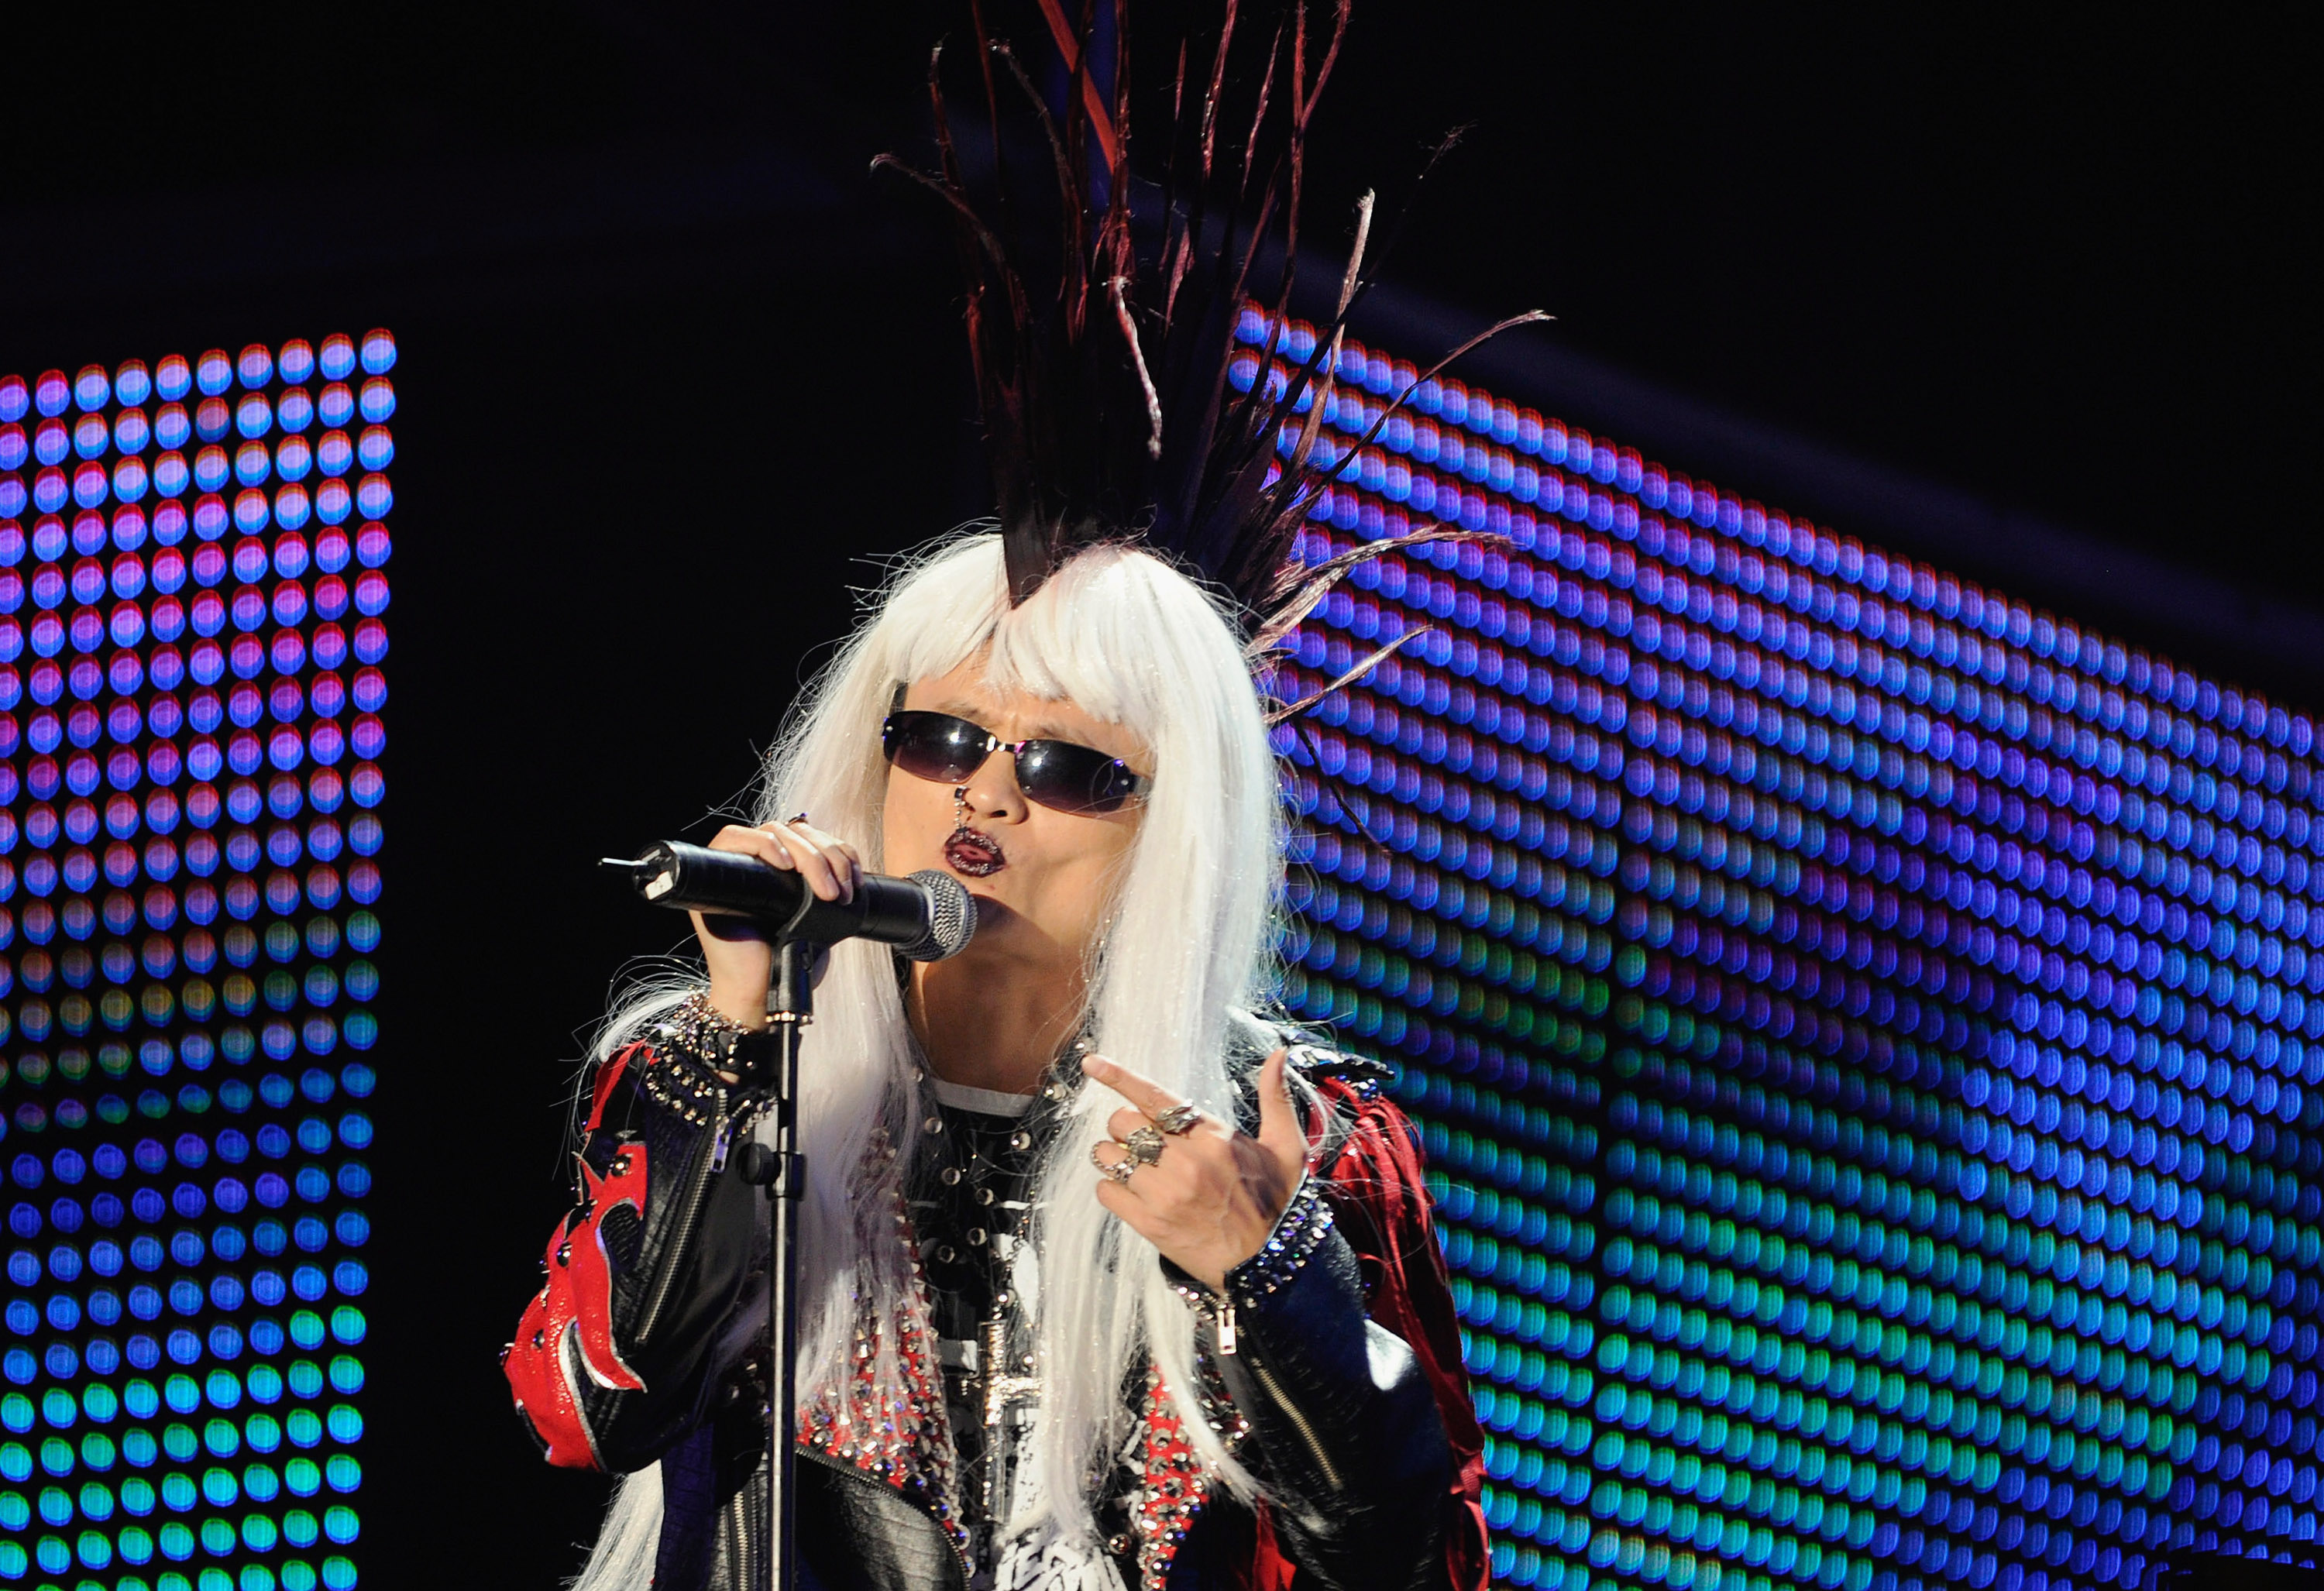 HANGZHOU, CHINA -  Alibaba Group Chairman and Chief Executive Officer Ma Yun dressed as a punk rocker performs during the 10th anniversary celebration of  Alibaba Group founding at Huanglong Sports Center on September 10, 2009 in Hangzhou, Zhejiang Province of China.  (Photo by ChinaFotoPress/Getty Images) (ChinaFotoPress—Getty Images)